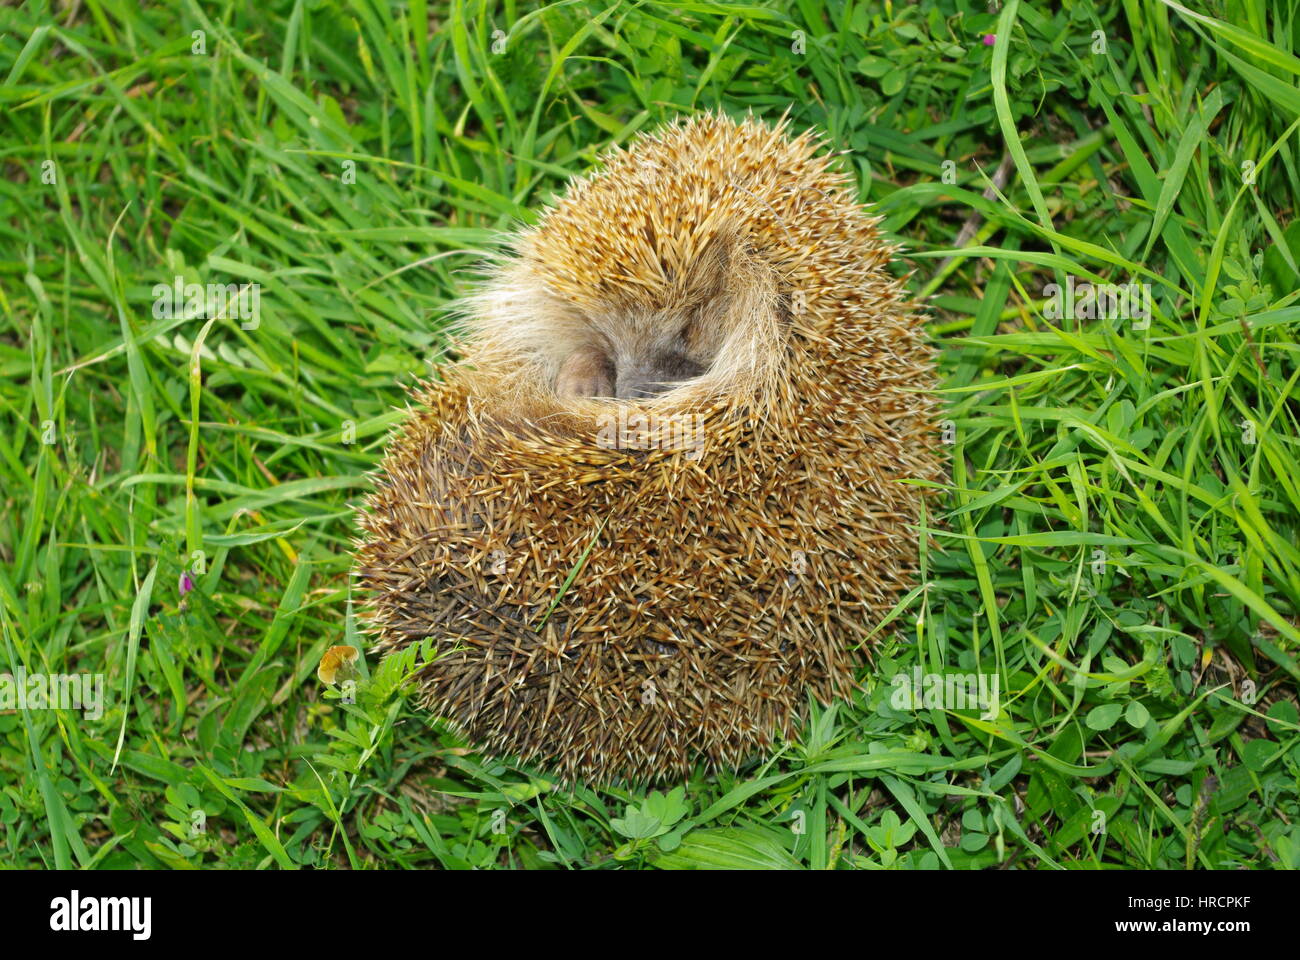 Hedgehog green meadow. Wild animal in its natural environment. Stock Photo